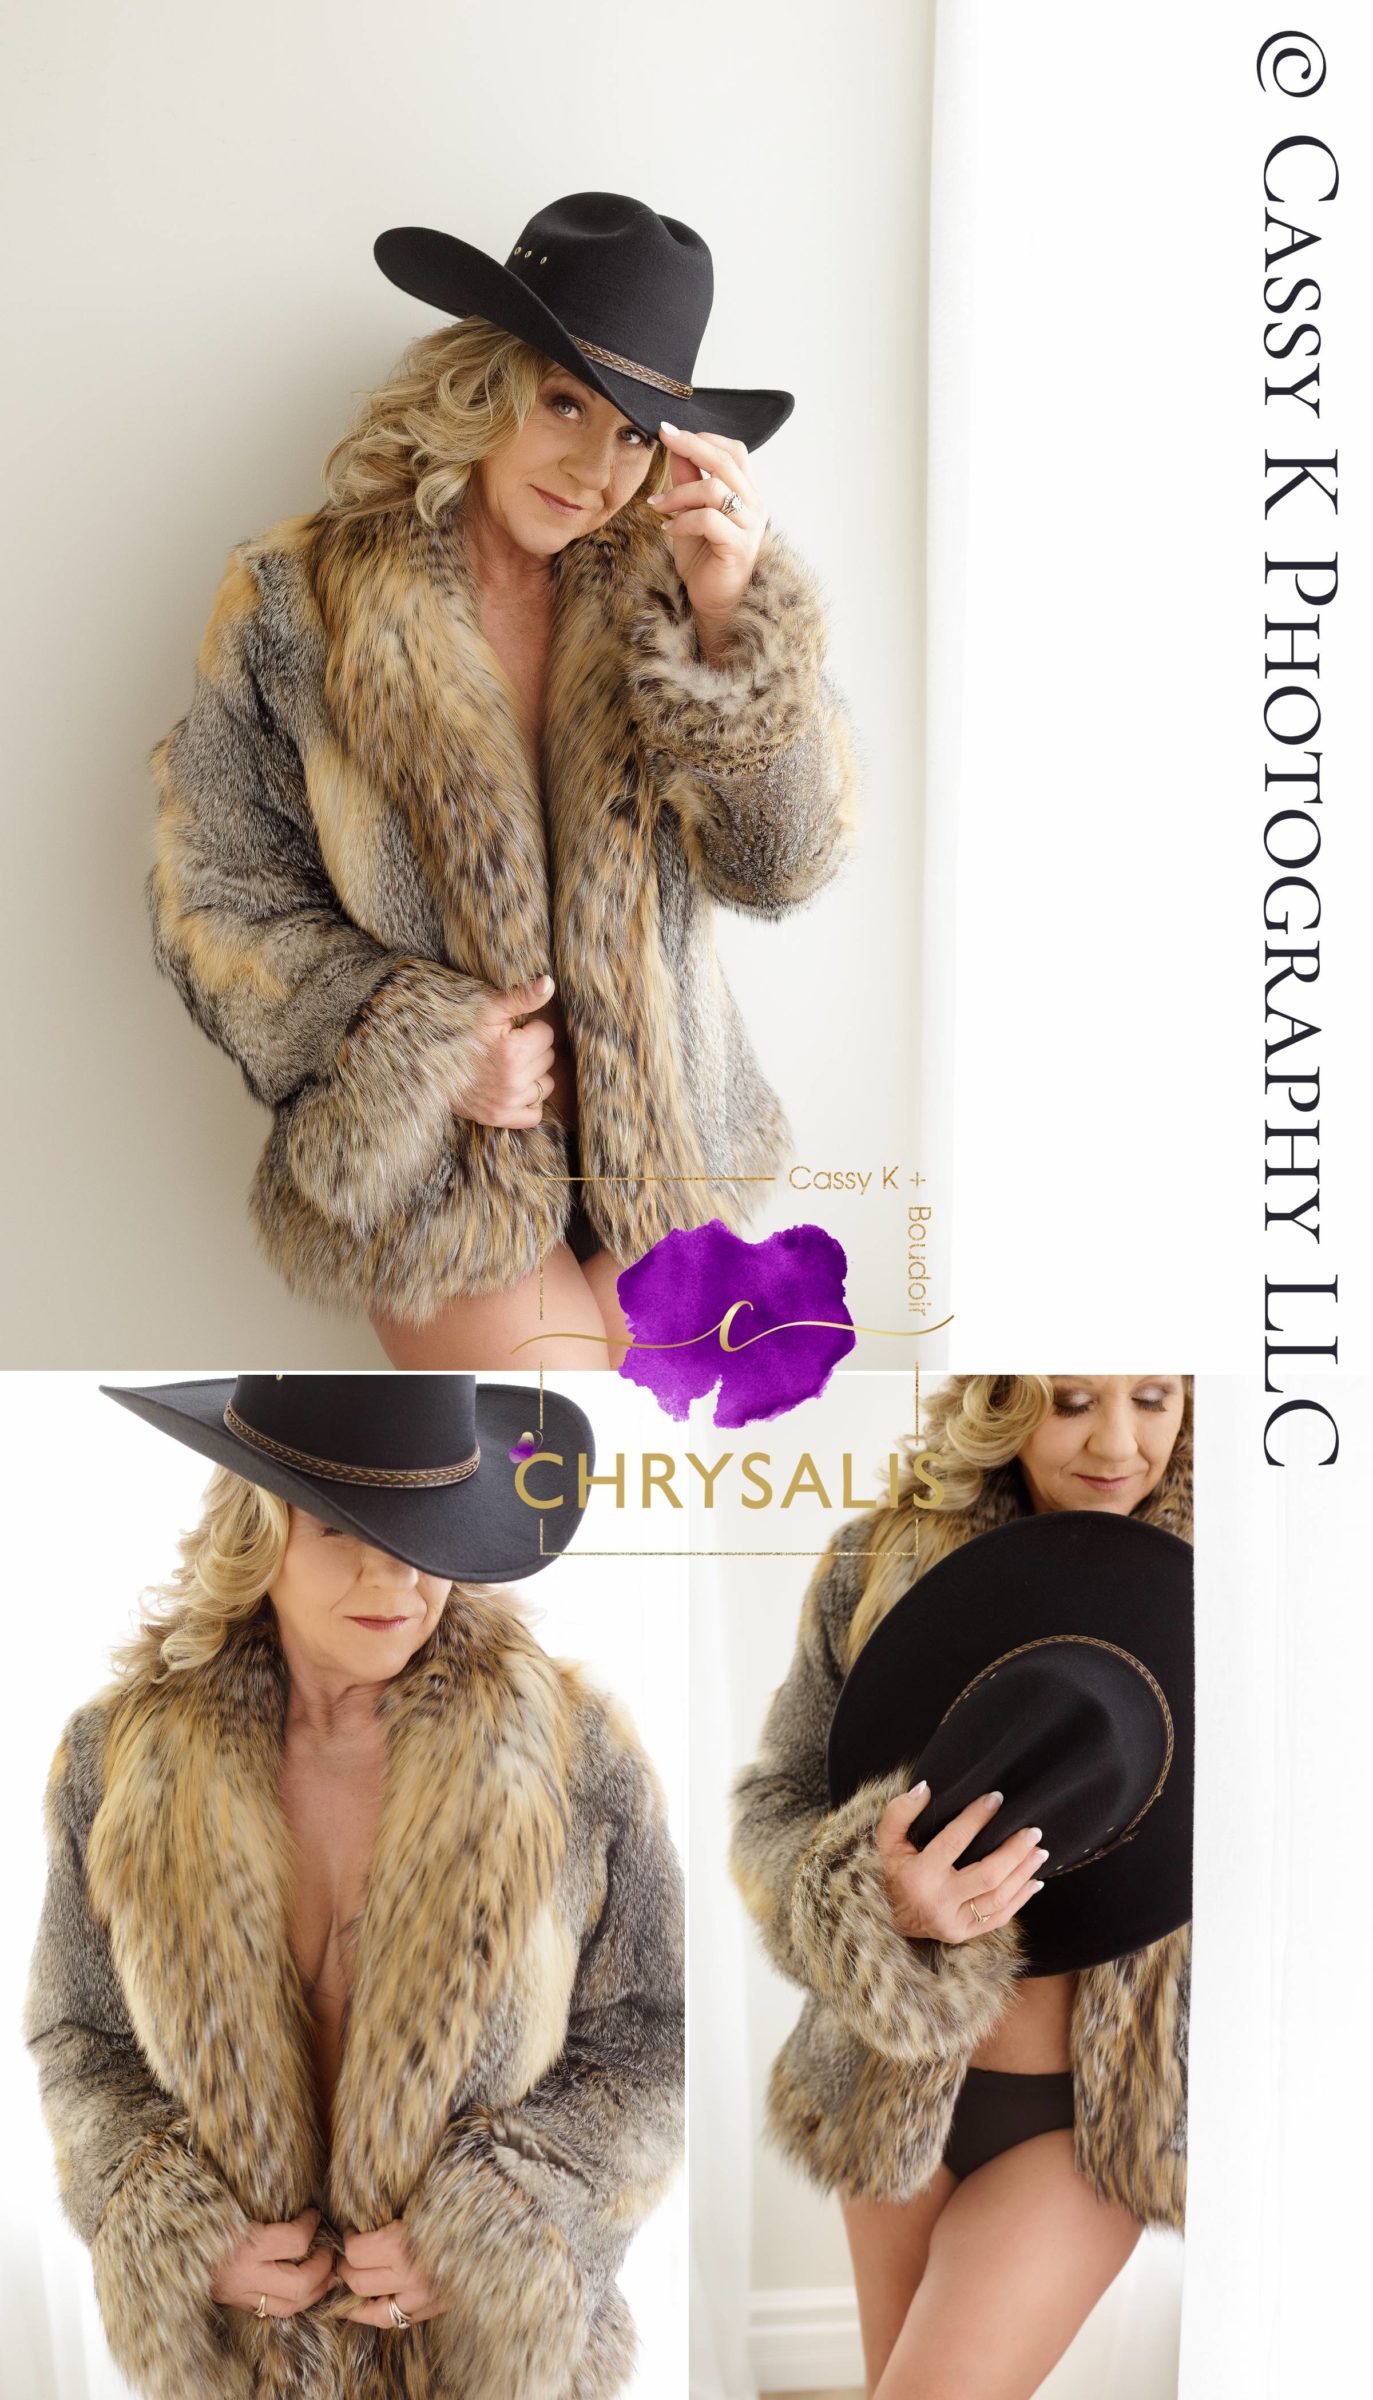 Blond hair woman proving never too old for boudoir wearing fur coat and cowboy hat for Boudoir Photoshoot